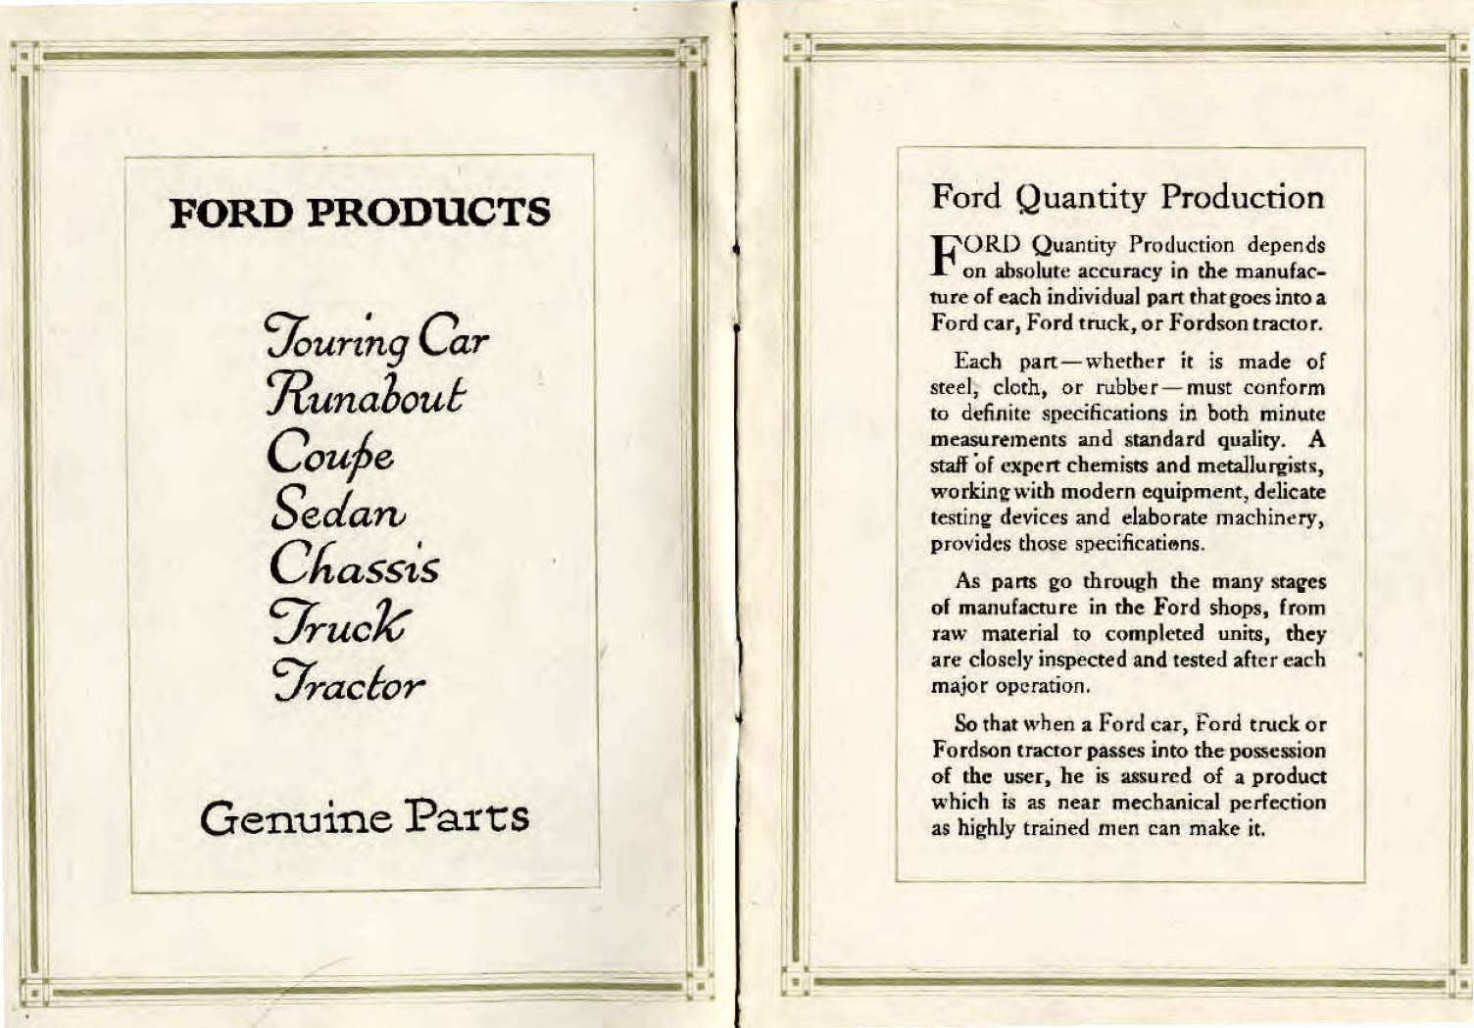 1923_Ford_Products-02-03